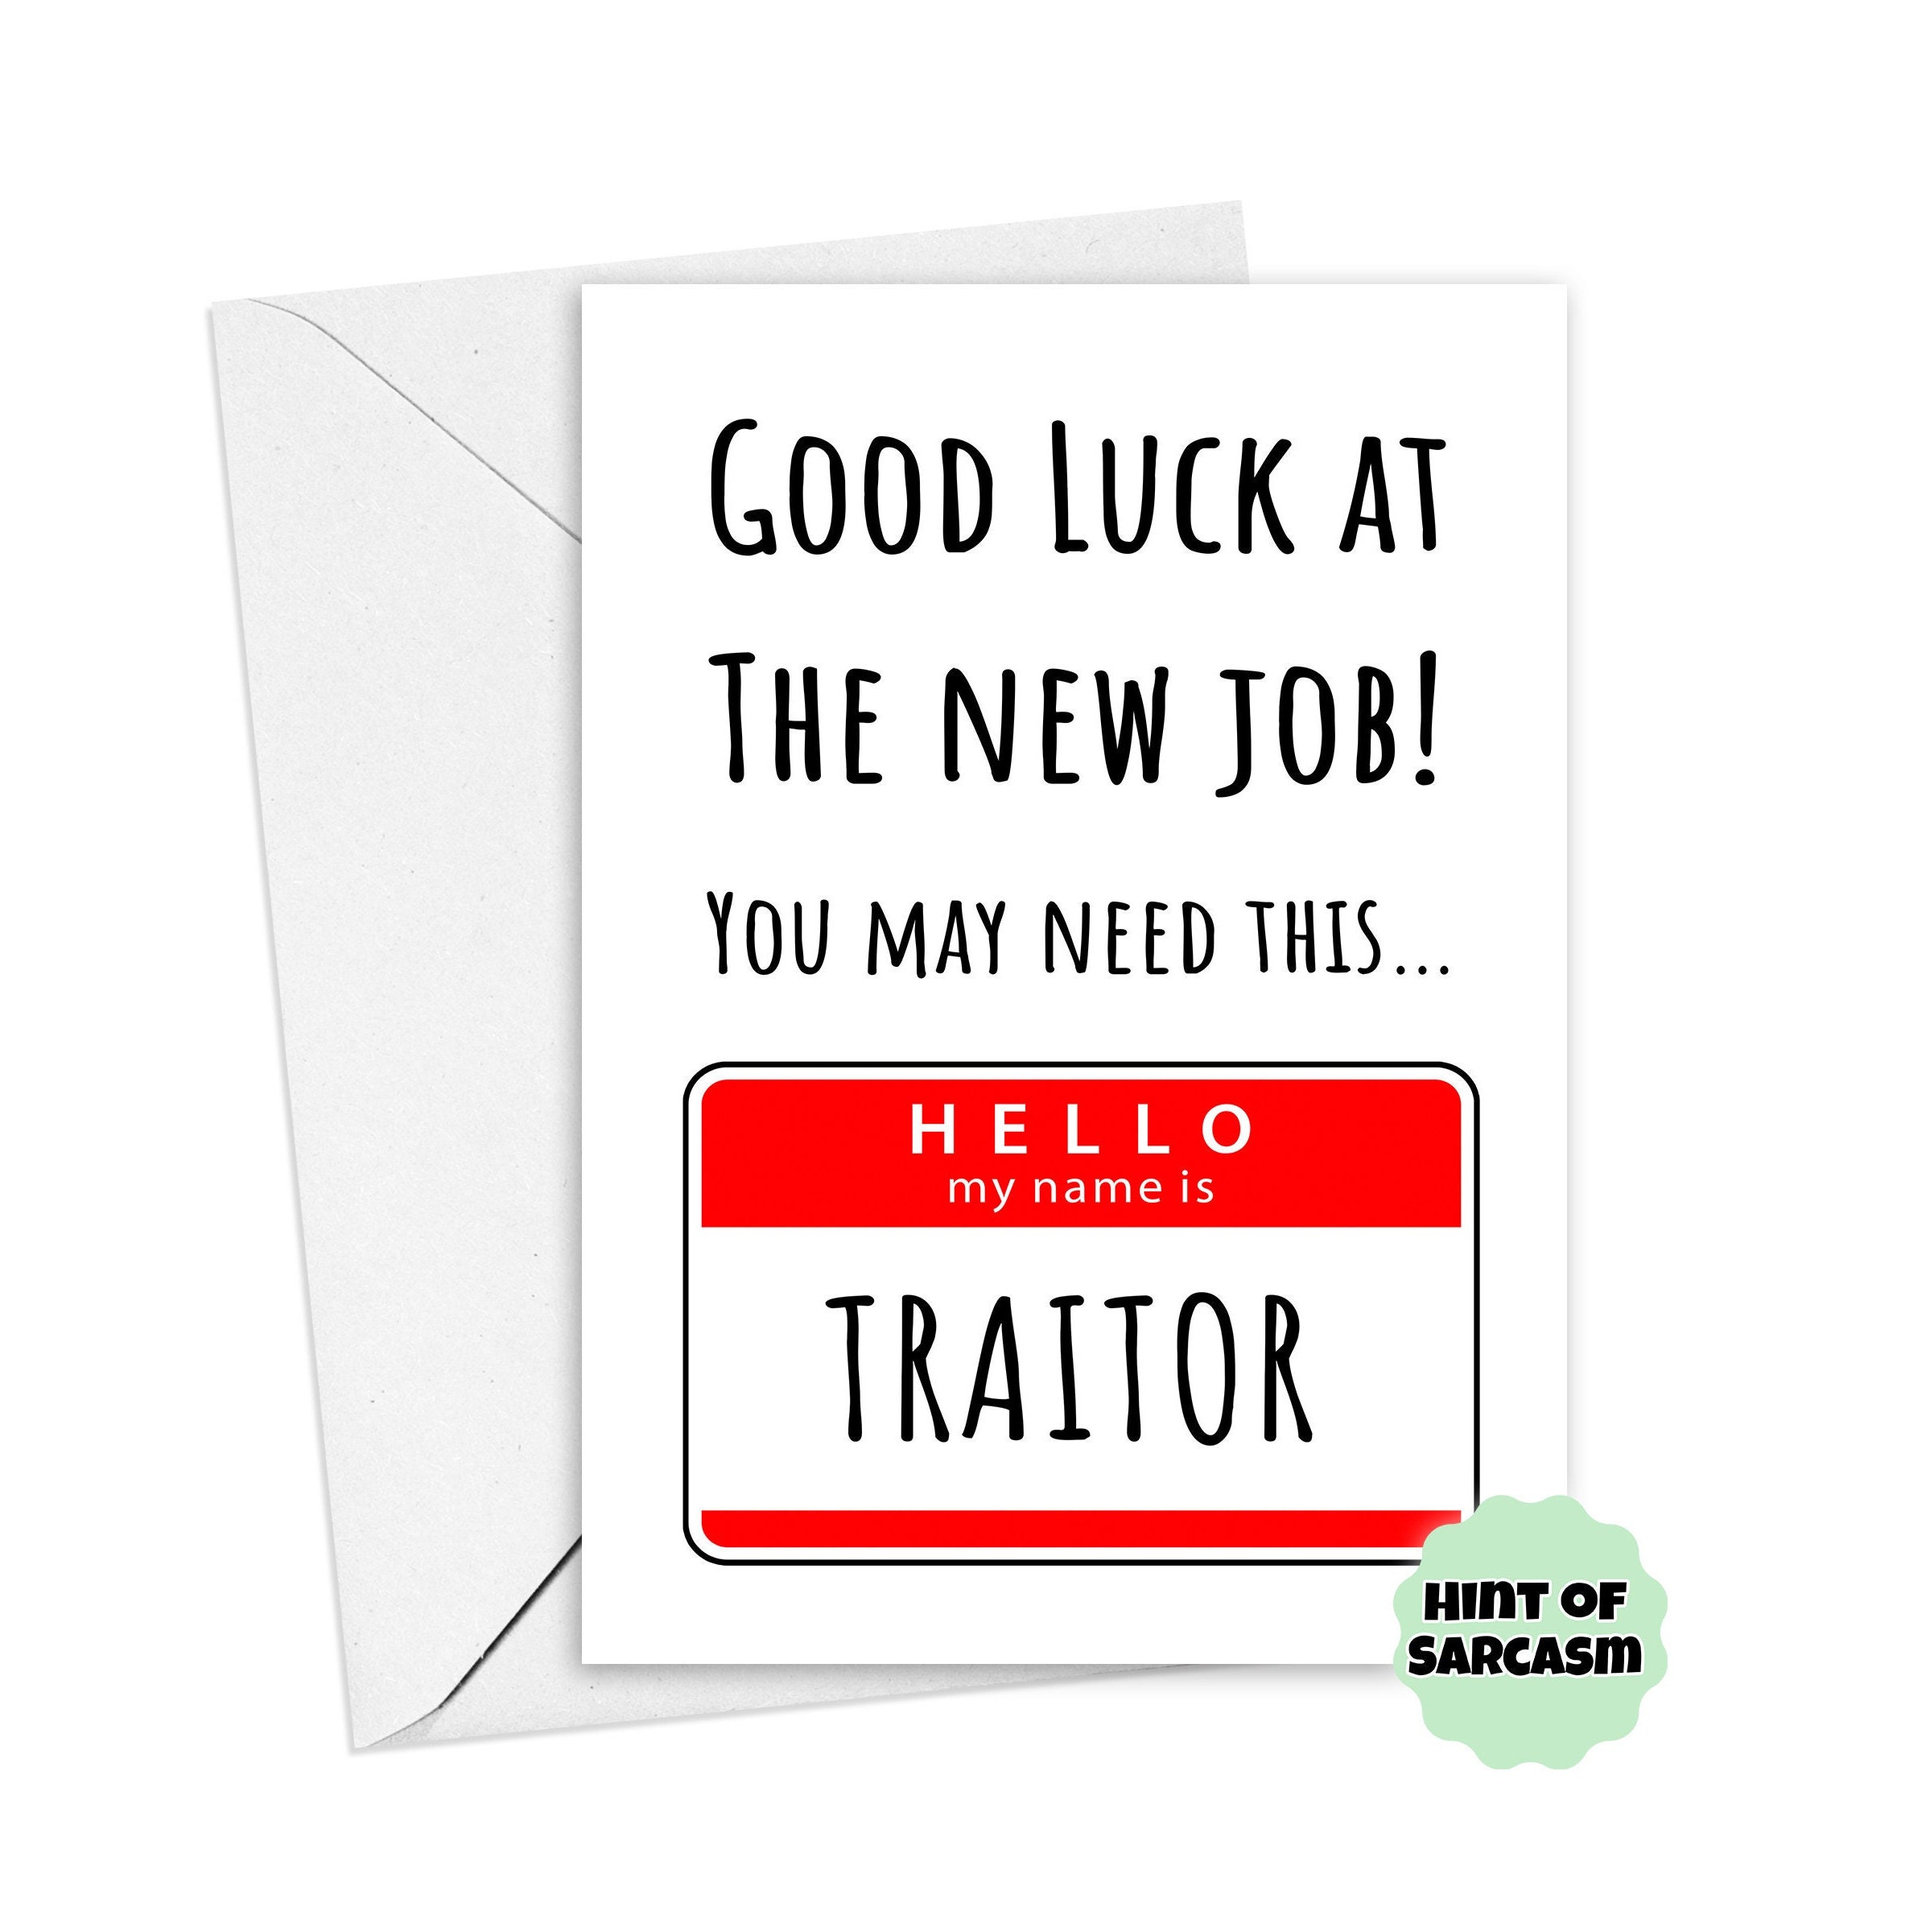 A5 Traitor Definition Card *Bold Font Edition*:| Funny Coworker leaving  Card| Coworker Definition Card || Leaving Card | New Job